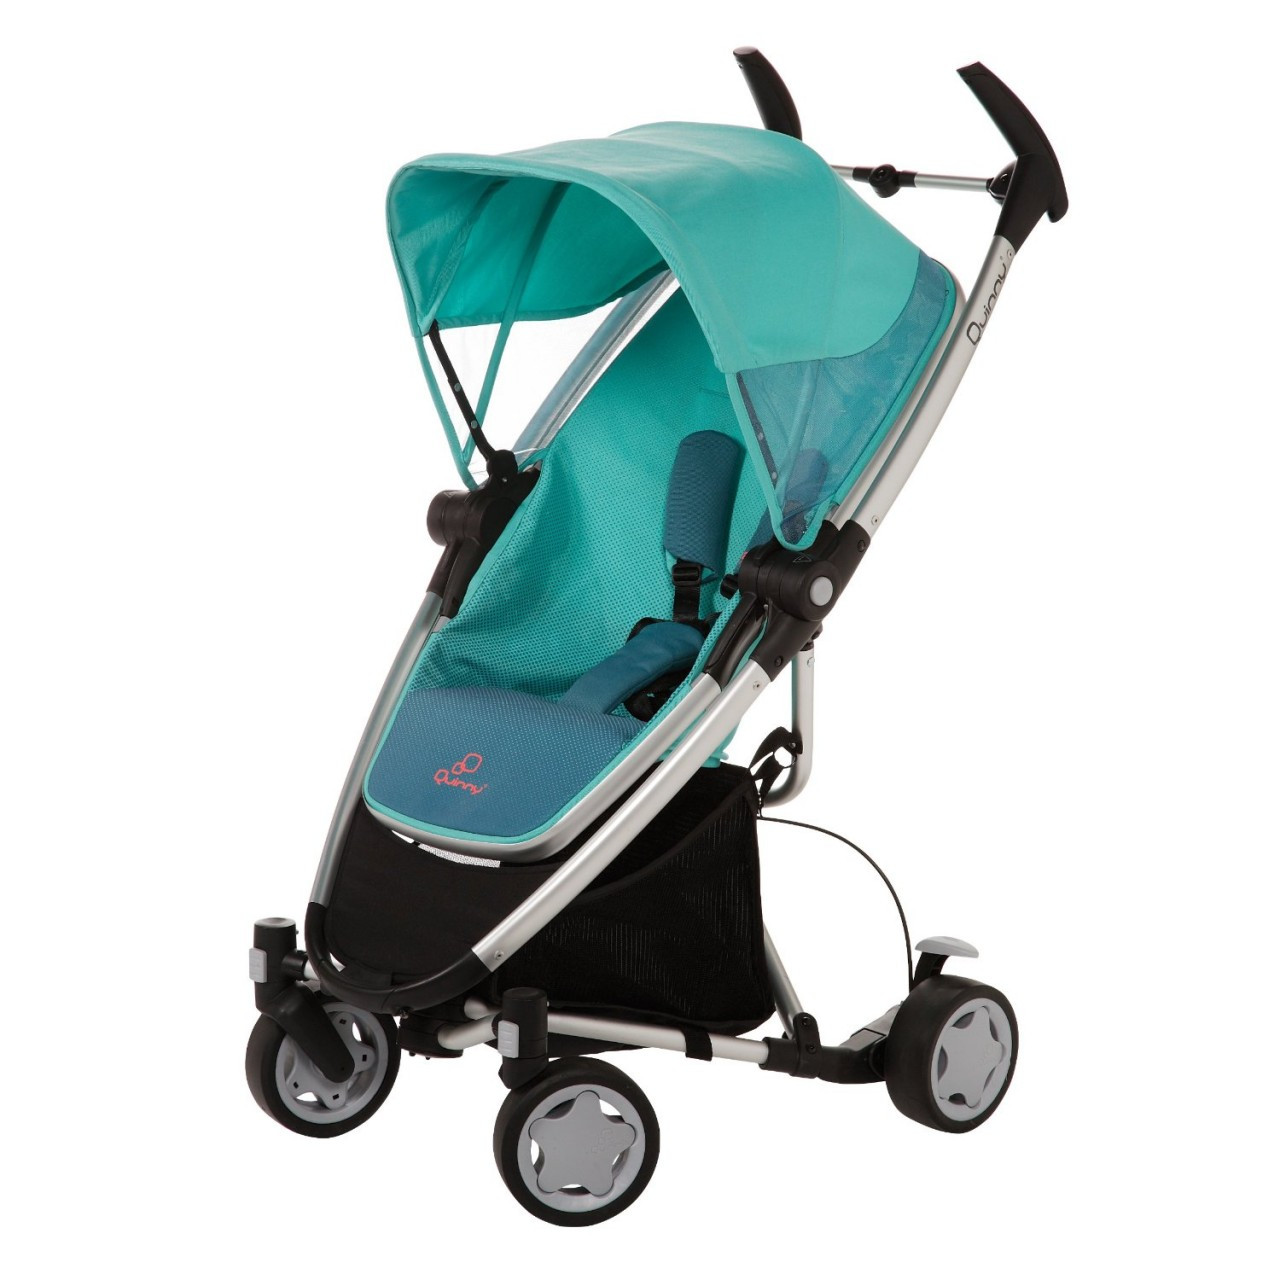 Hijgend Legacy thema Quinny Zapp XTRA Stroller (Fading Green) - For Moms